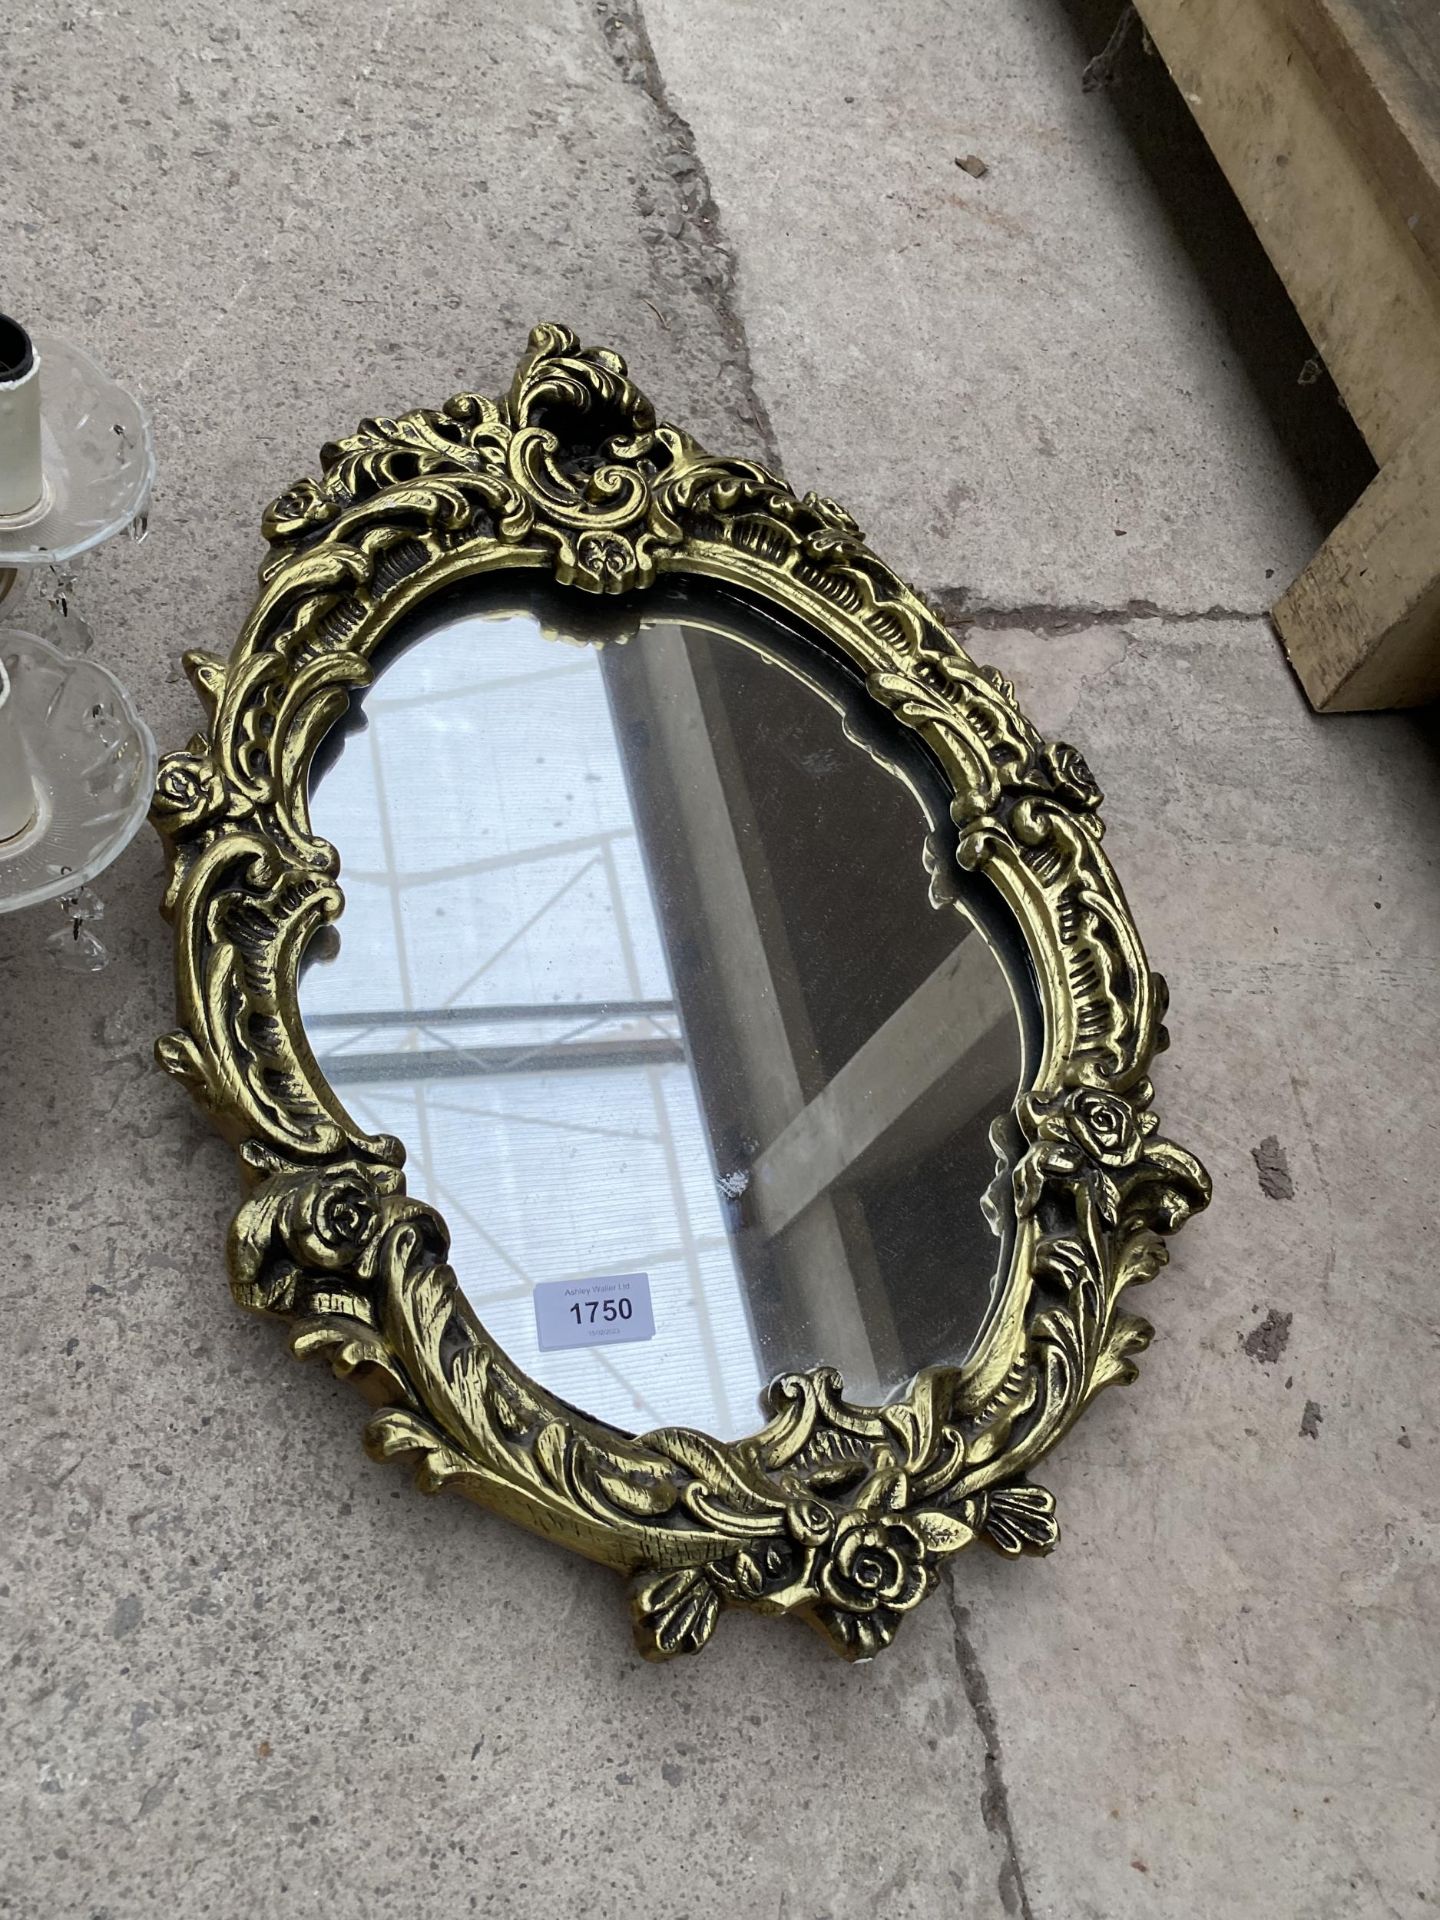 A DECORATIVE GILT FRAMED WALL MIRROR AND A LIGHT FITTING - Image 2 of 3